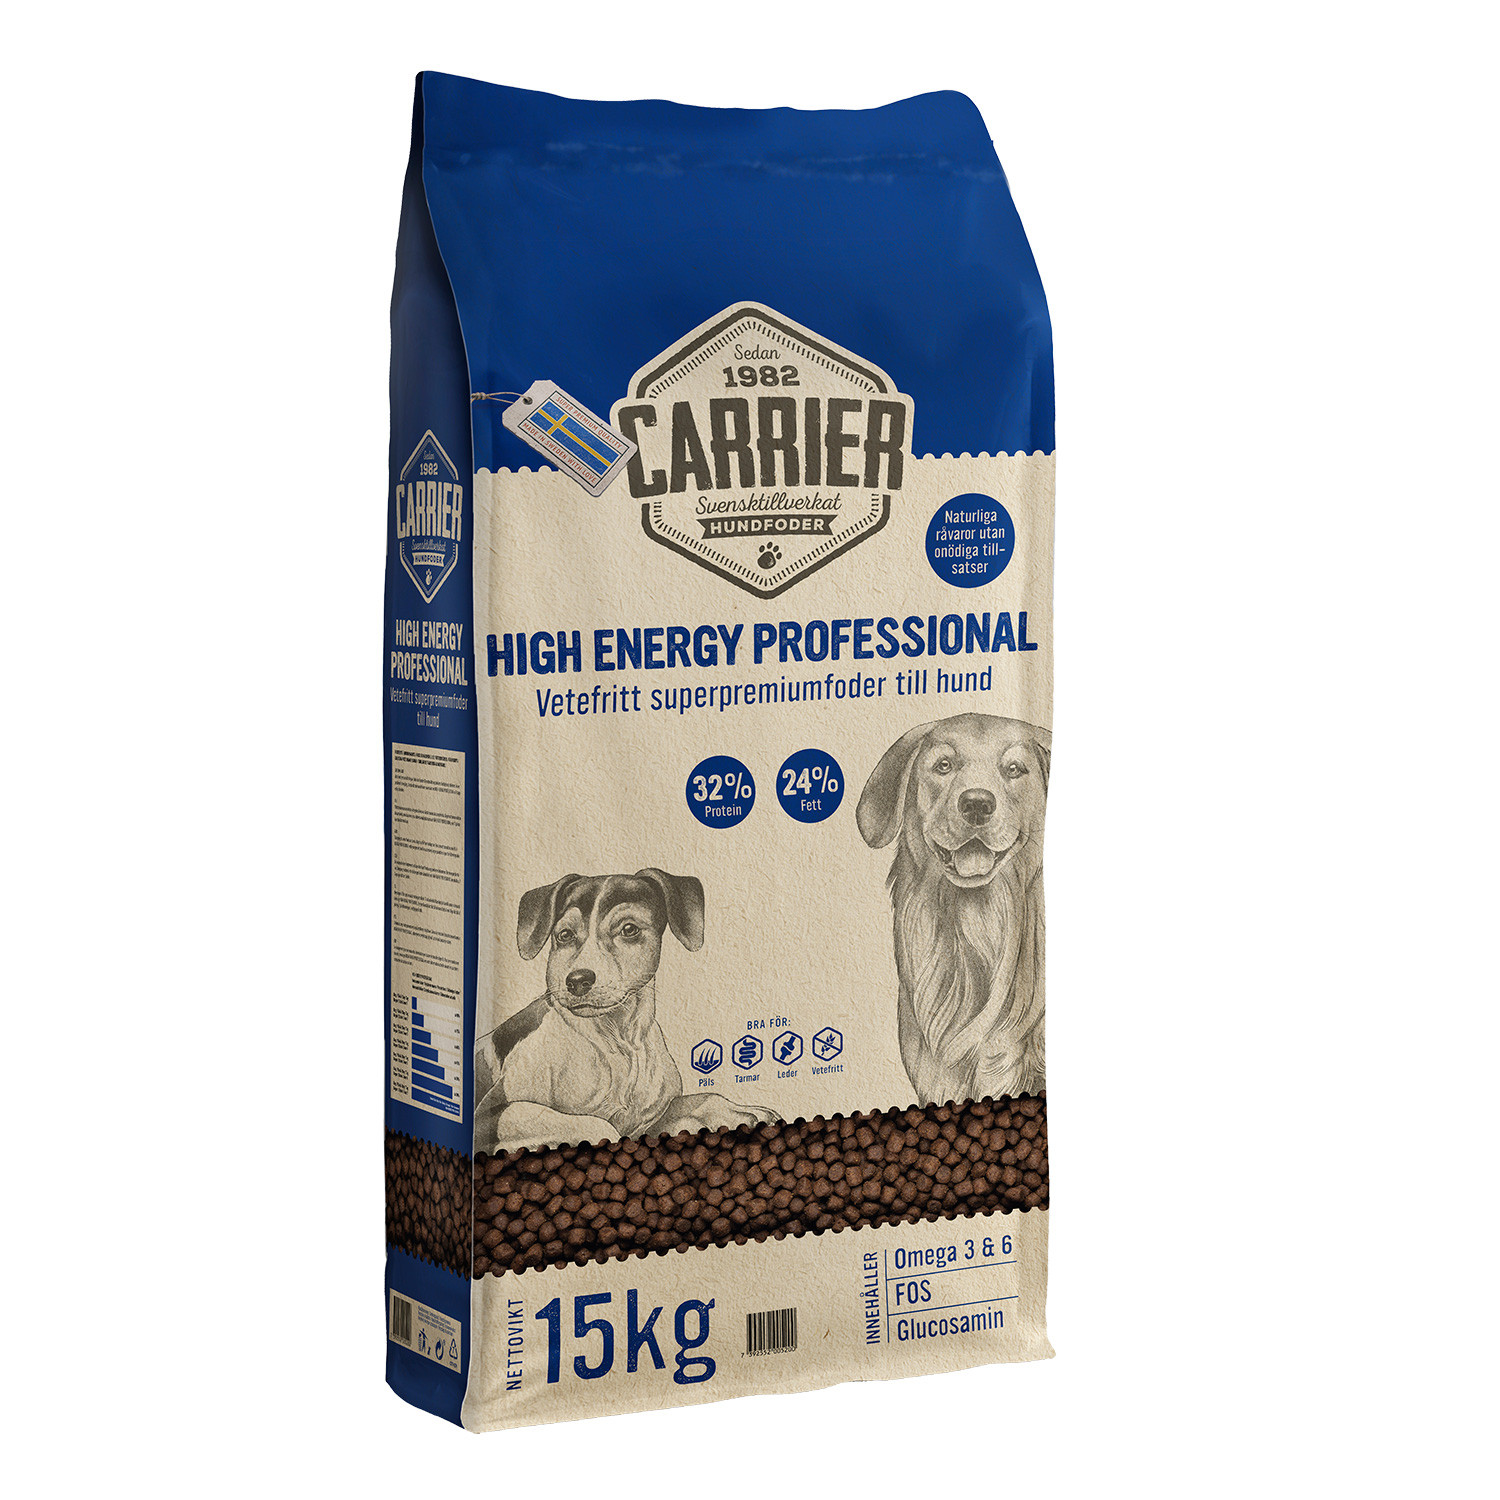 Carrier high energy professional 15kg